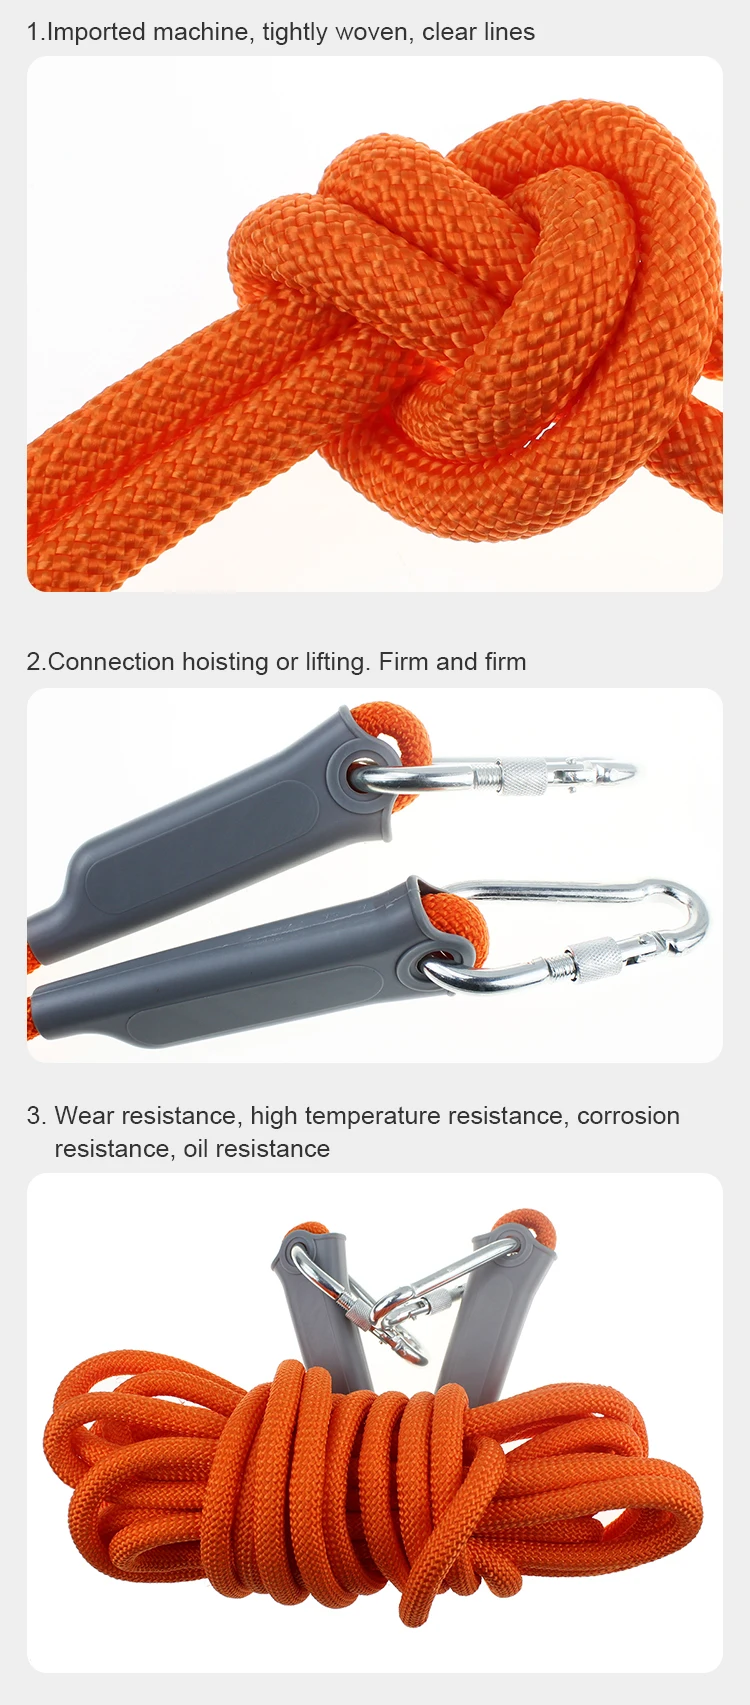 Custom Braided Polyester Static Safety Rope for High Aerial Operation supplier